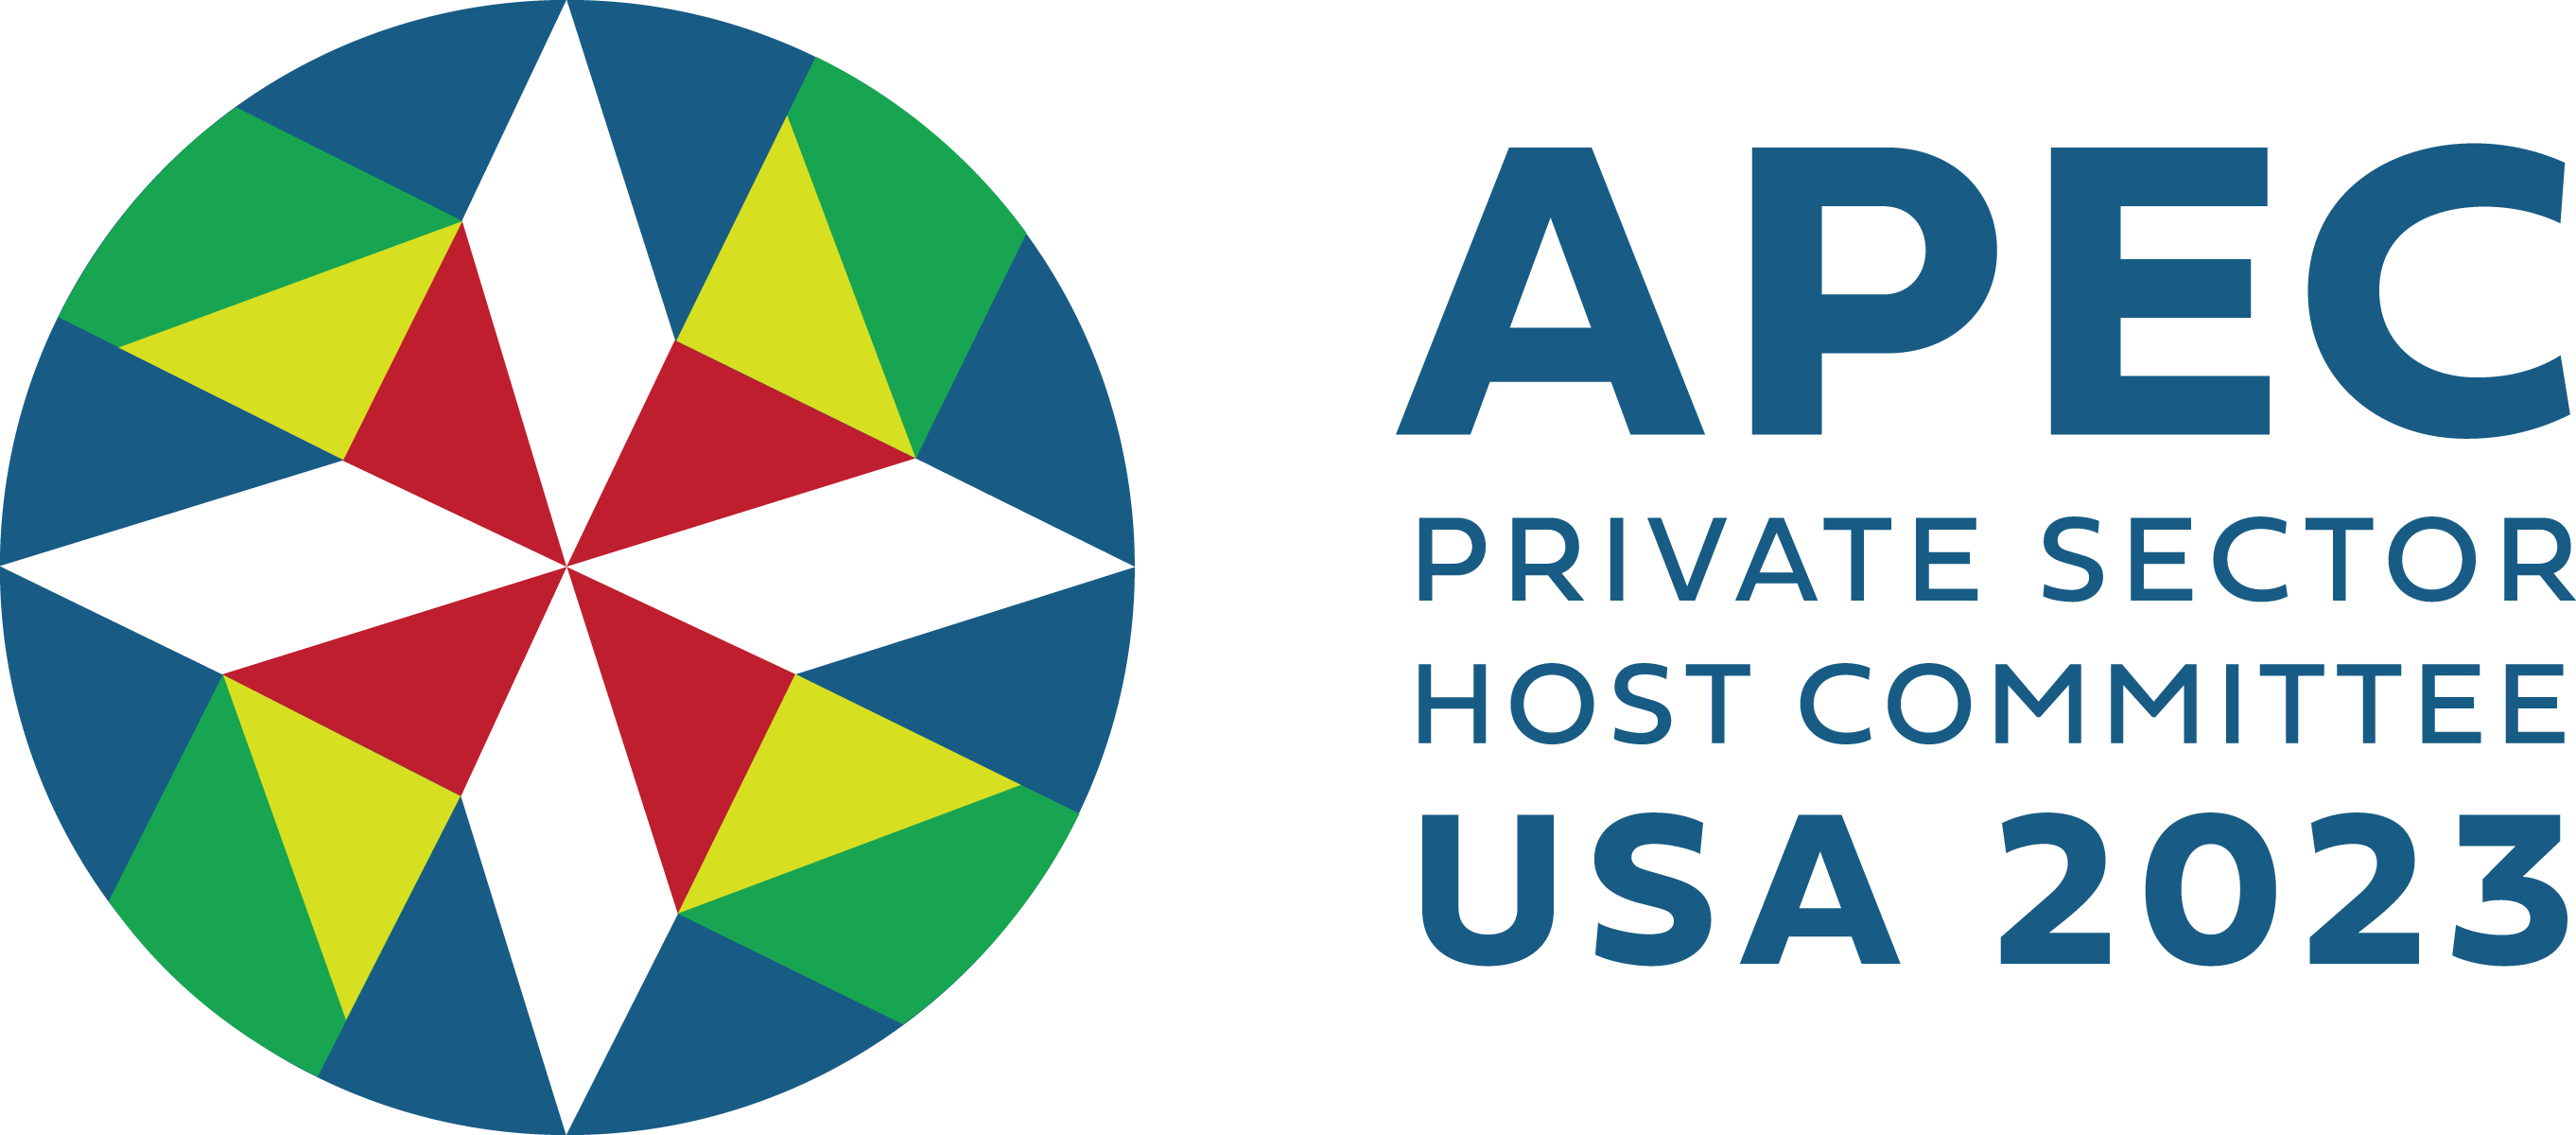 NCAPEC Launches APEC USA 2023 Private Sector Host Committee To Advance